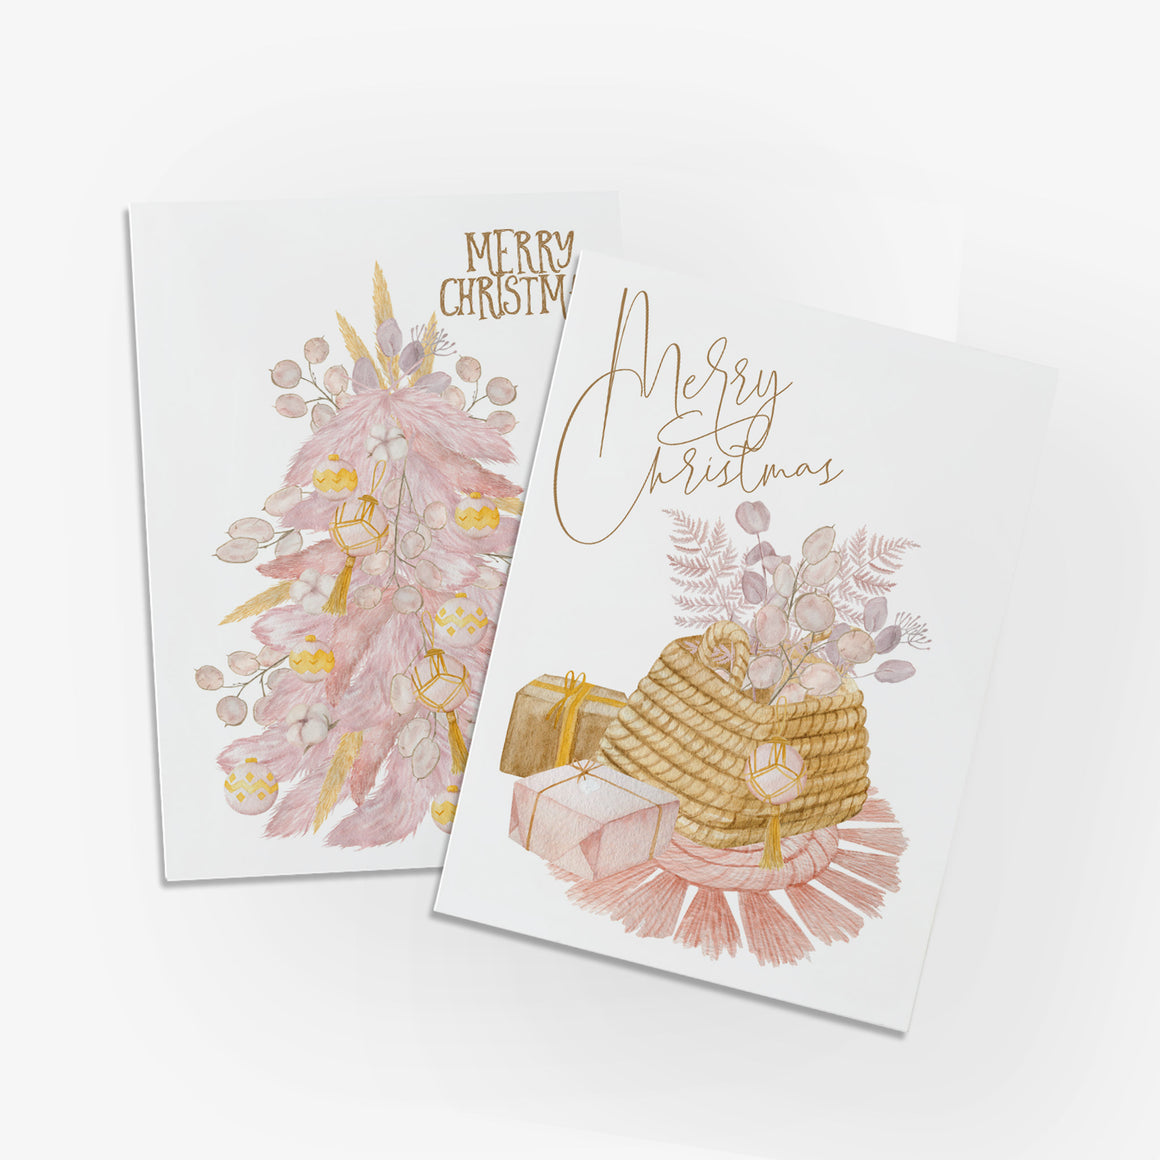 24 Romantic Merry Christmas Cards - 2 Boho Designs in Blush and Beige + Envelopes